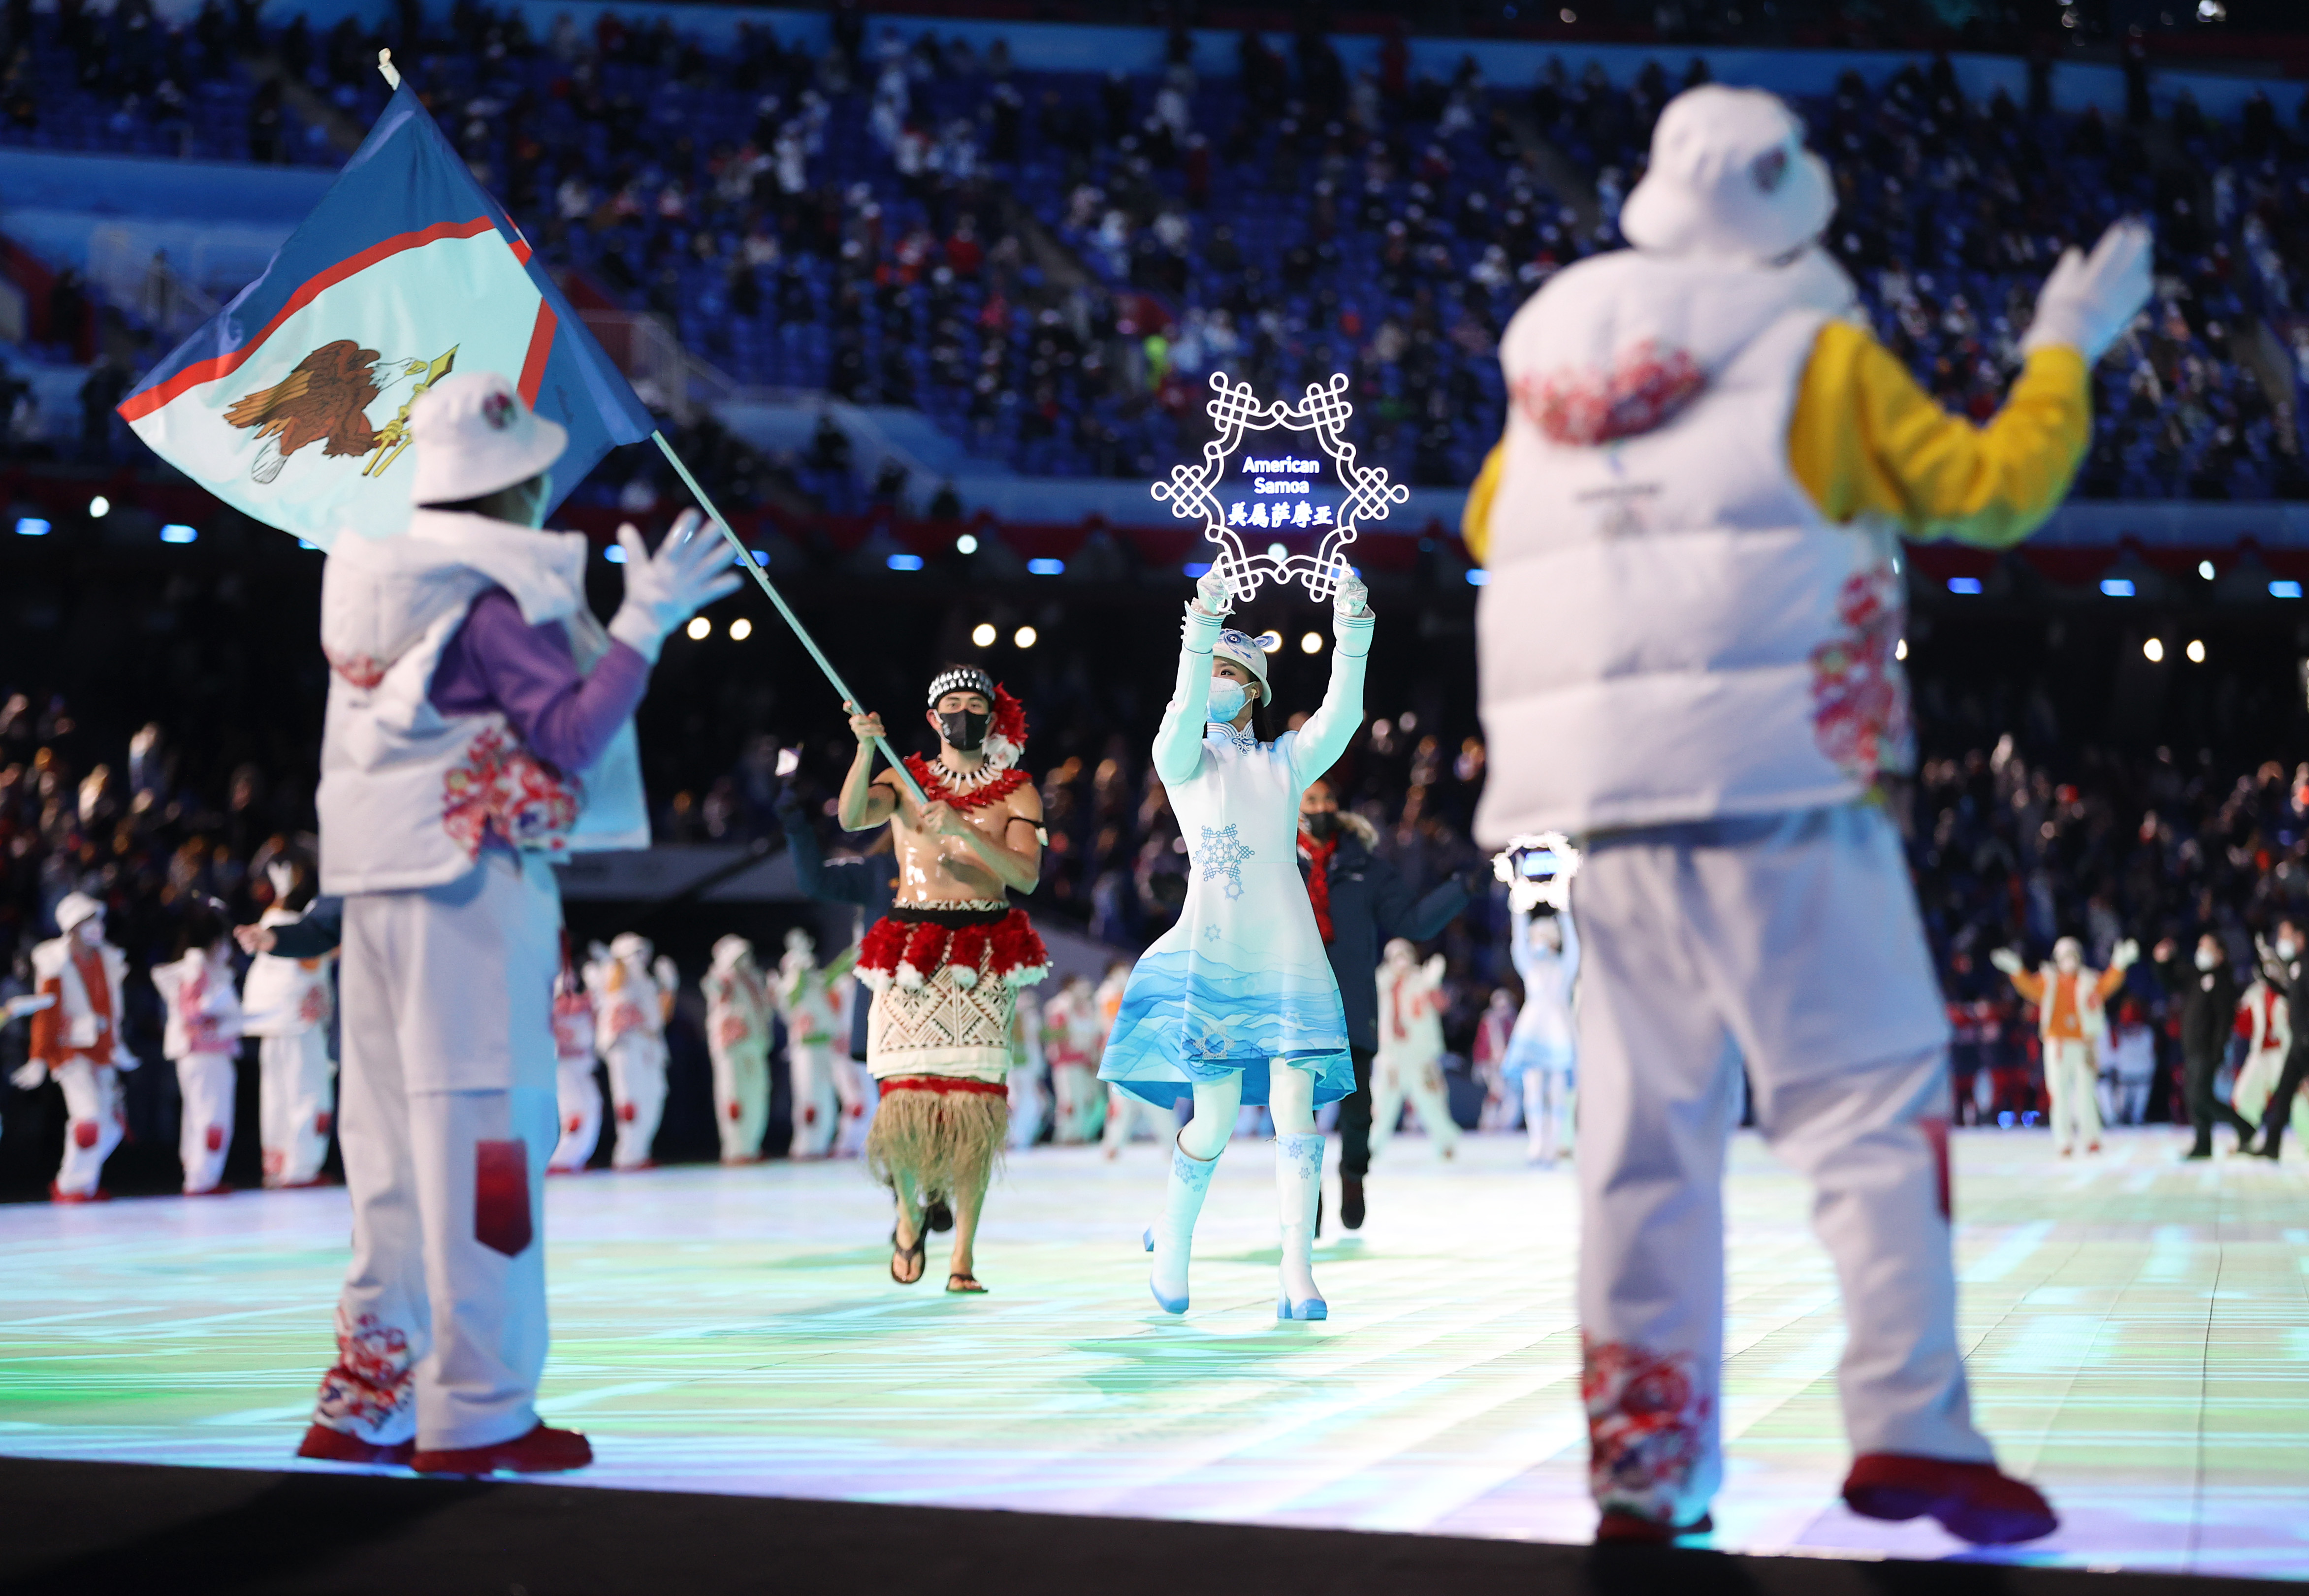 Flag bearer Nathan Crumpton of Team American Samoa carries their flag during the Opening Ceremony of the Beijing 2022 Winter Olympics at the Beijing National Stadium on February 04 in Beijing, China